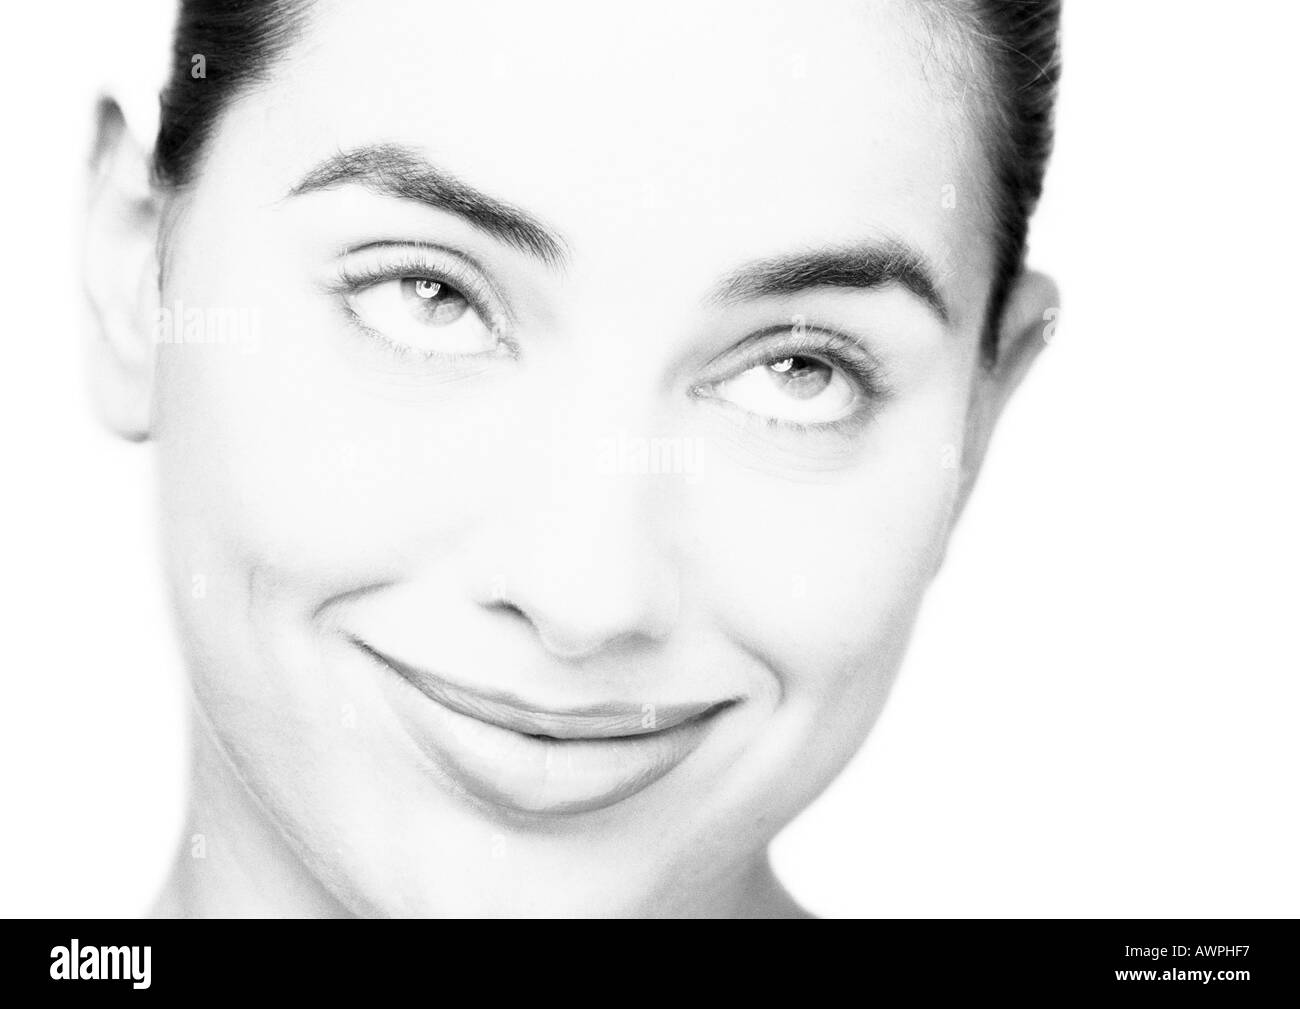 Woman smiling, looking up, close-up, portrait, b&w Stock Photo